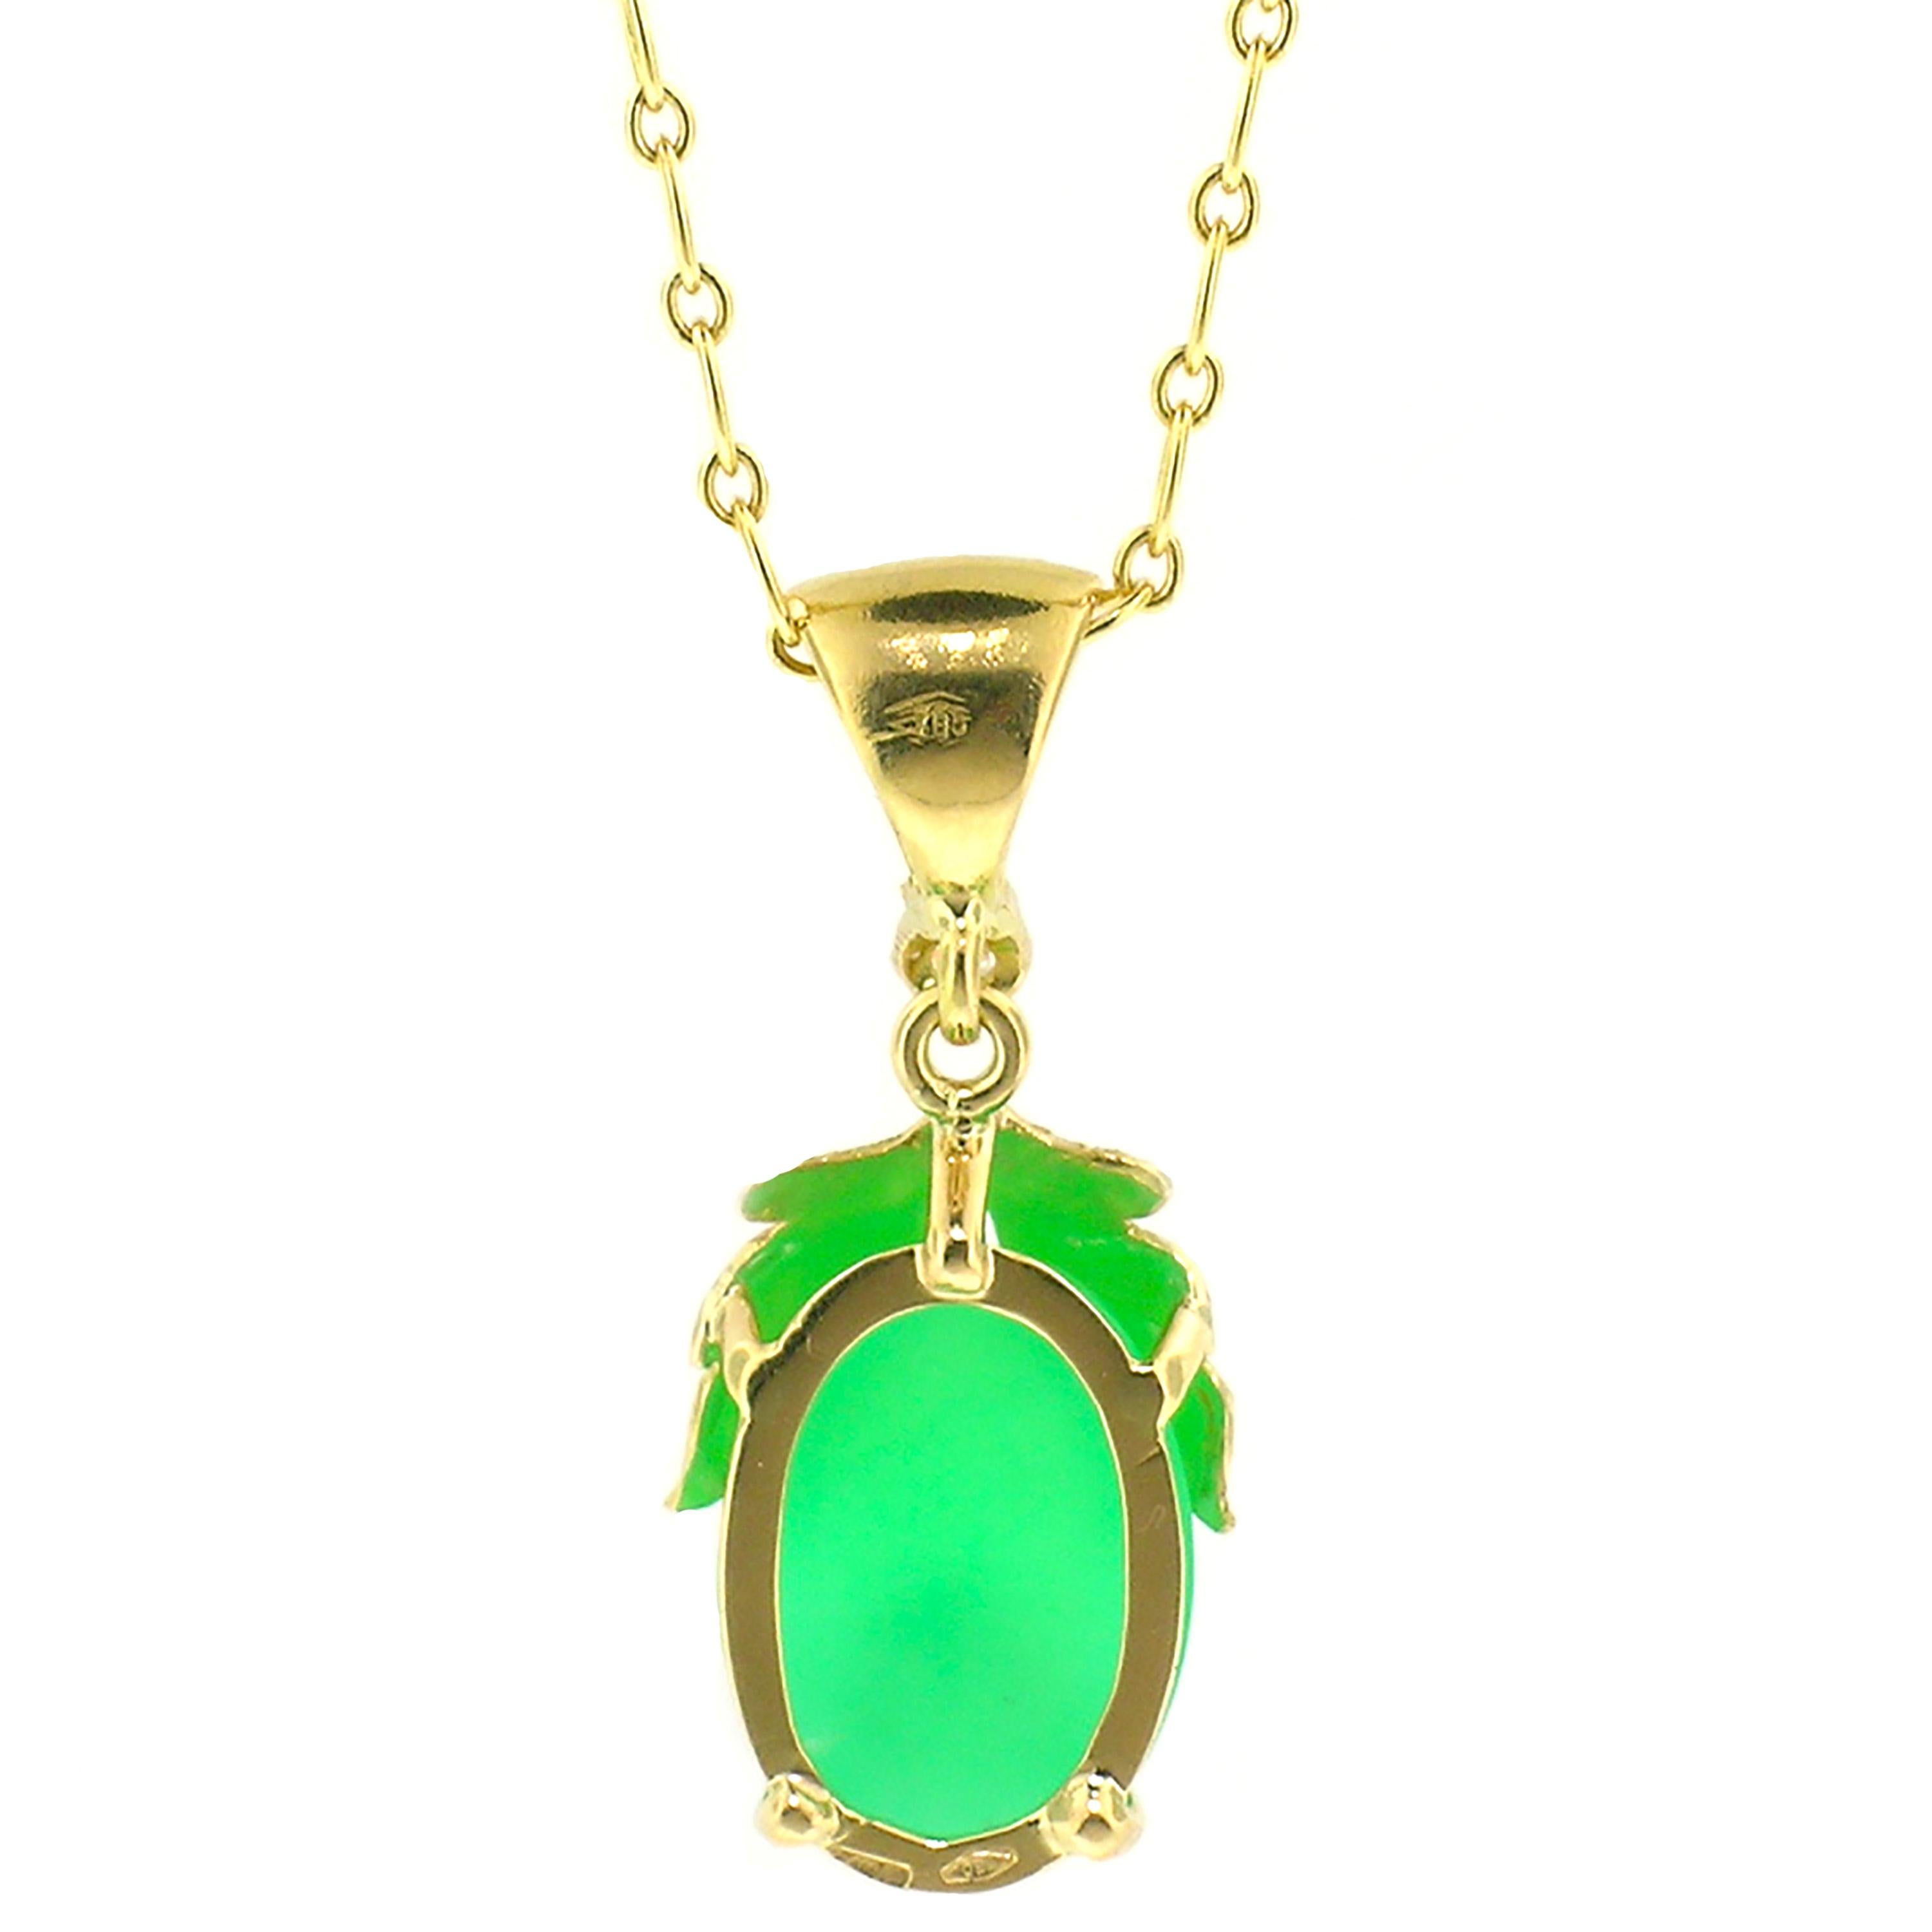 Contemporary 6.98ct Chrysoprase and 18kt Necklace, Made in Italy by Cynthia Scott Jewelry For Sale